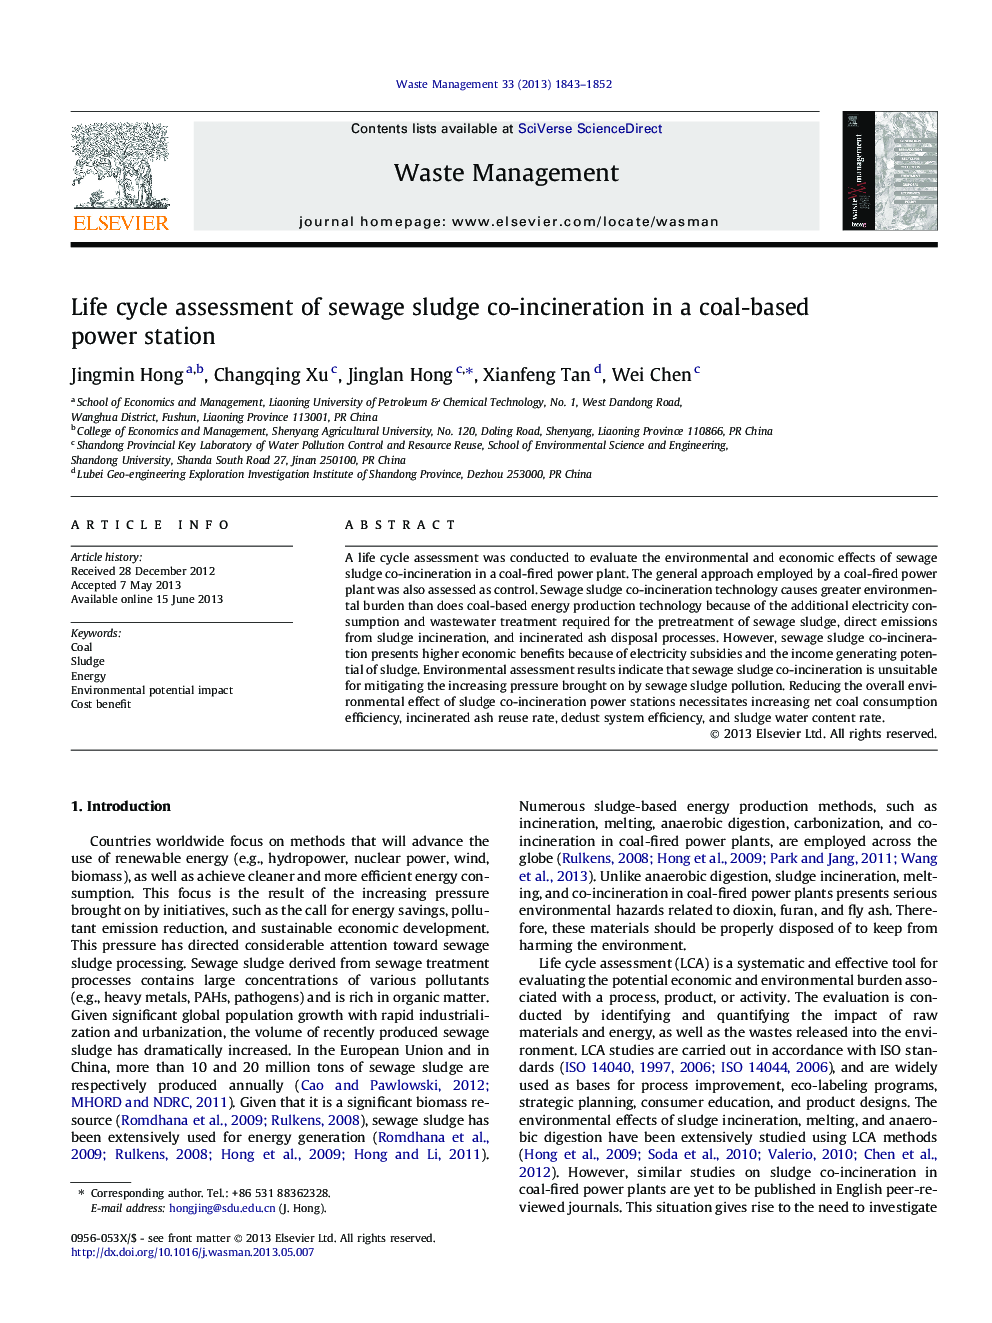 Life cycle assessment of sewage sludge co-incineration in a coal-based power station